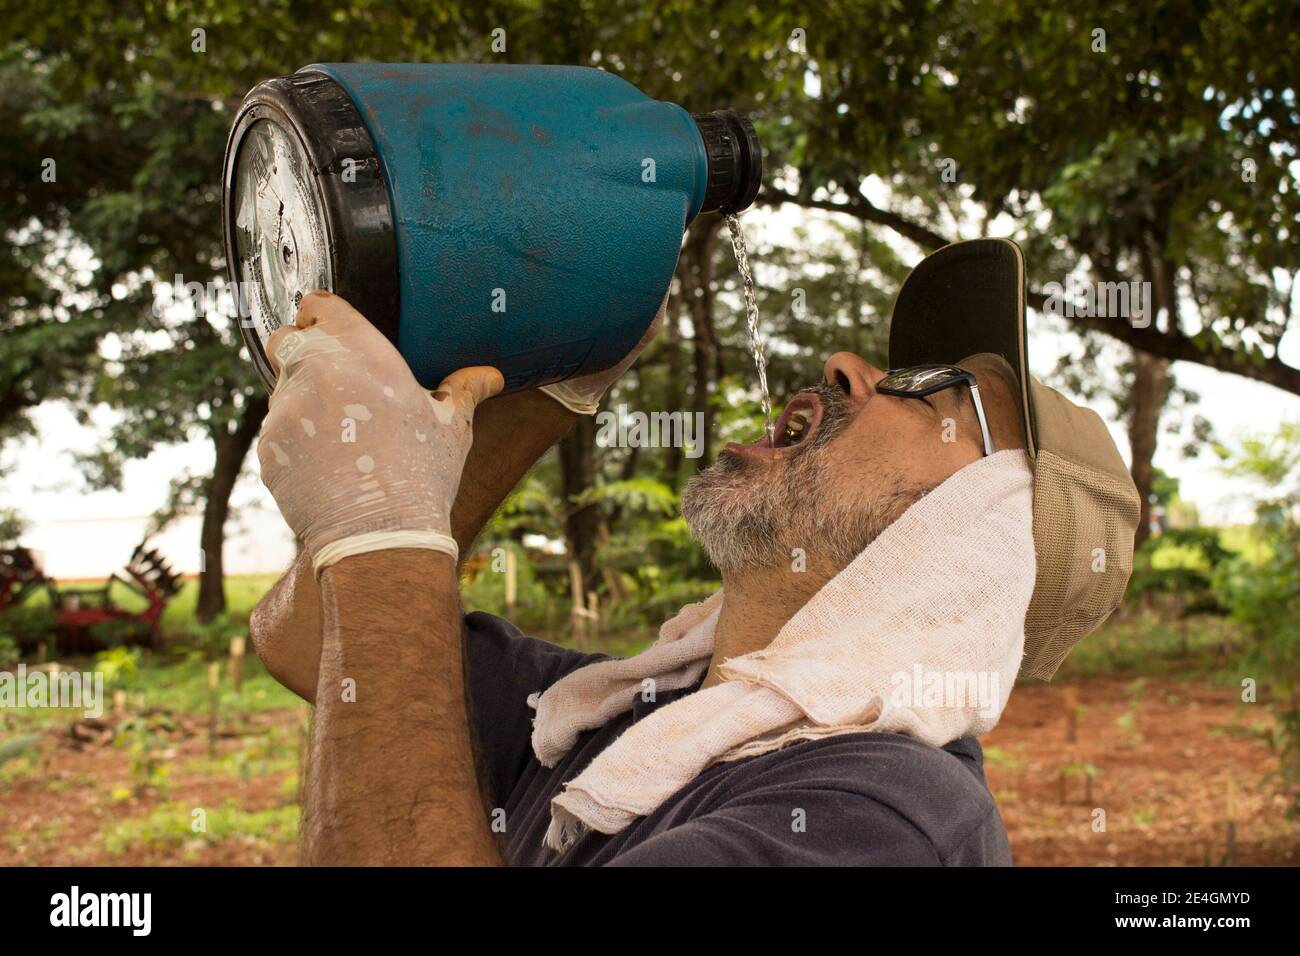 Ibitinga / Sao Paulo / Brazil - 01 23 2020: Mature man sweating and  drinking water after doing hard work planting in the farm Stock Photo